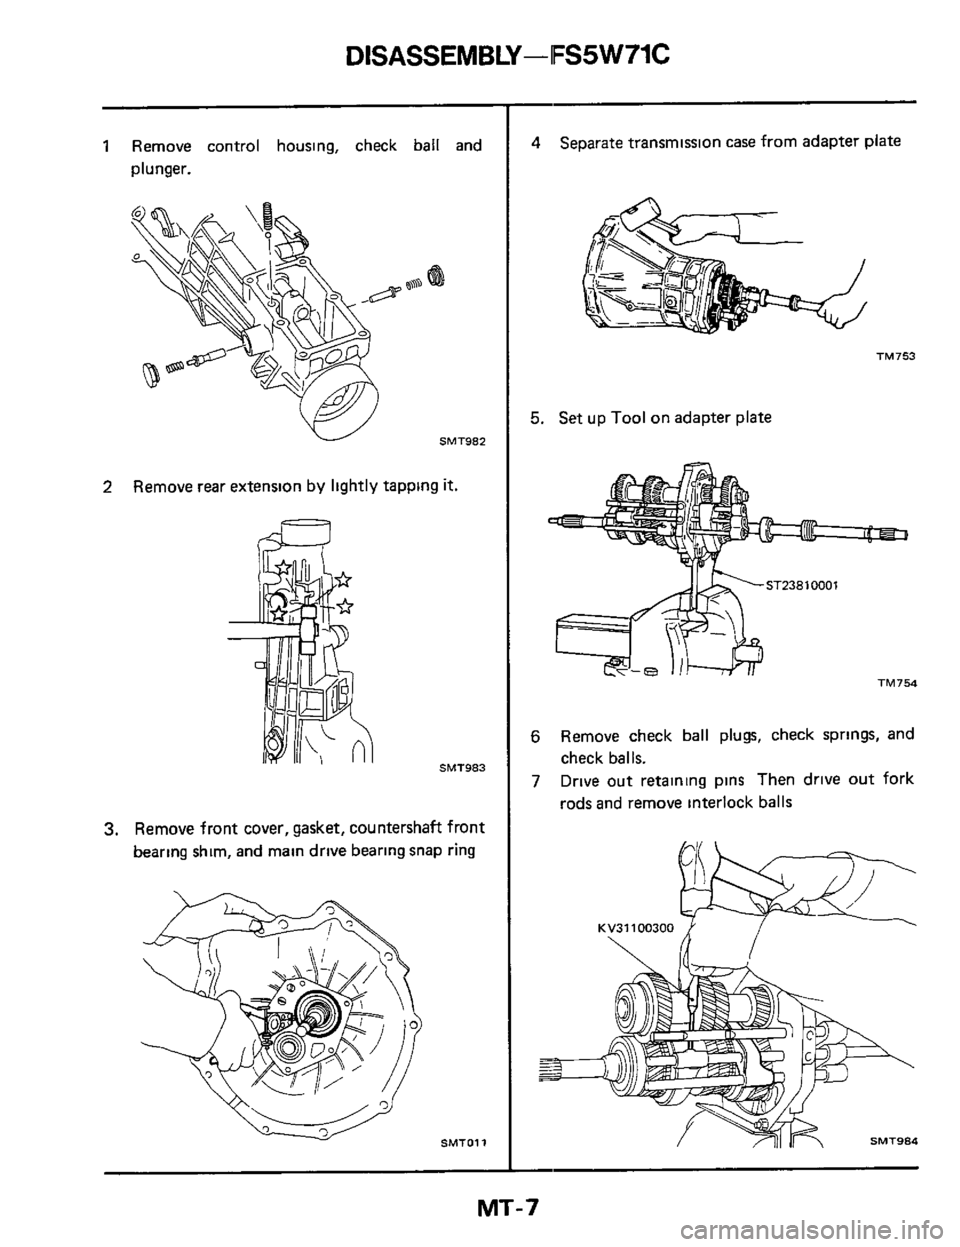 NISSAN 300ZX 1984 Z31 Manual Transmission Workshop Manual DlSASSEMBLY-IFS5W71C 
1 Remove control housing,  check ball and 
plunger. 
W SMT982 
2 Remove rear extension  by lightly  tapping it. 
60 
SMT983 
3. Remove  front cover, gasket, countershaft  front 
